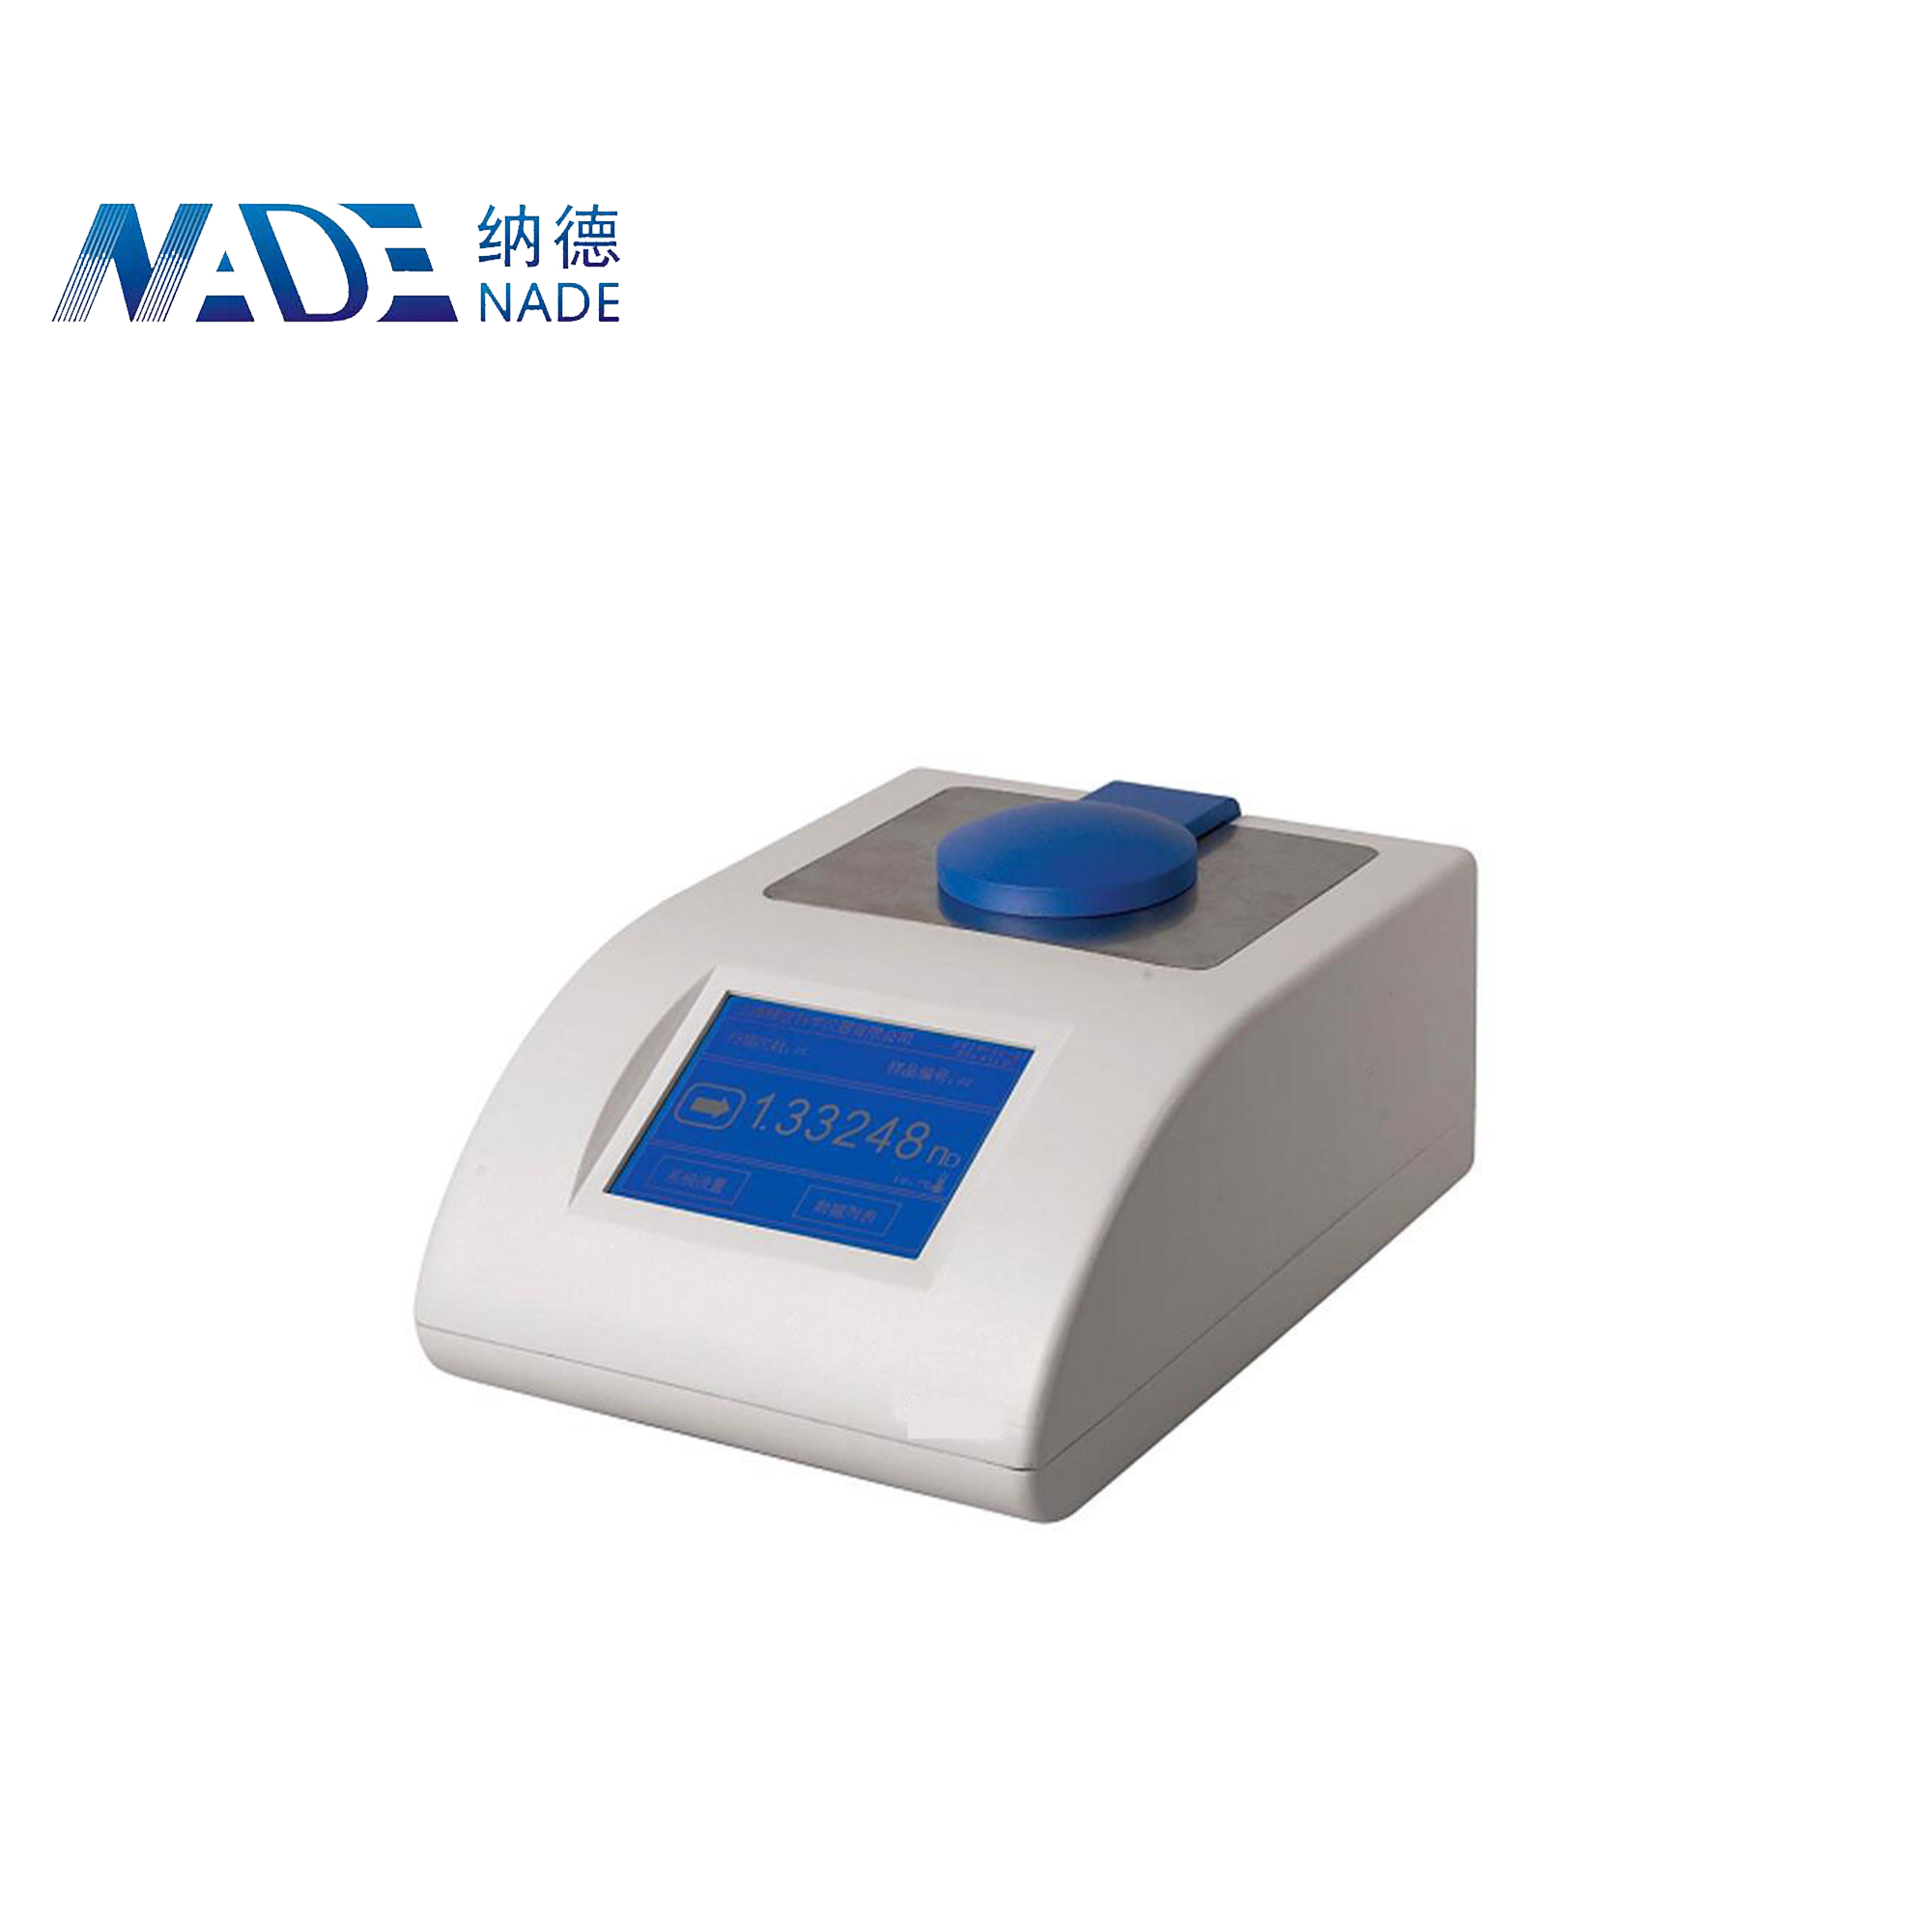 Nade Lab Optical Instrument Automatic Digital ABBE Refractometer WYA-Z